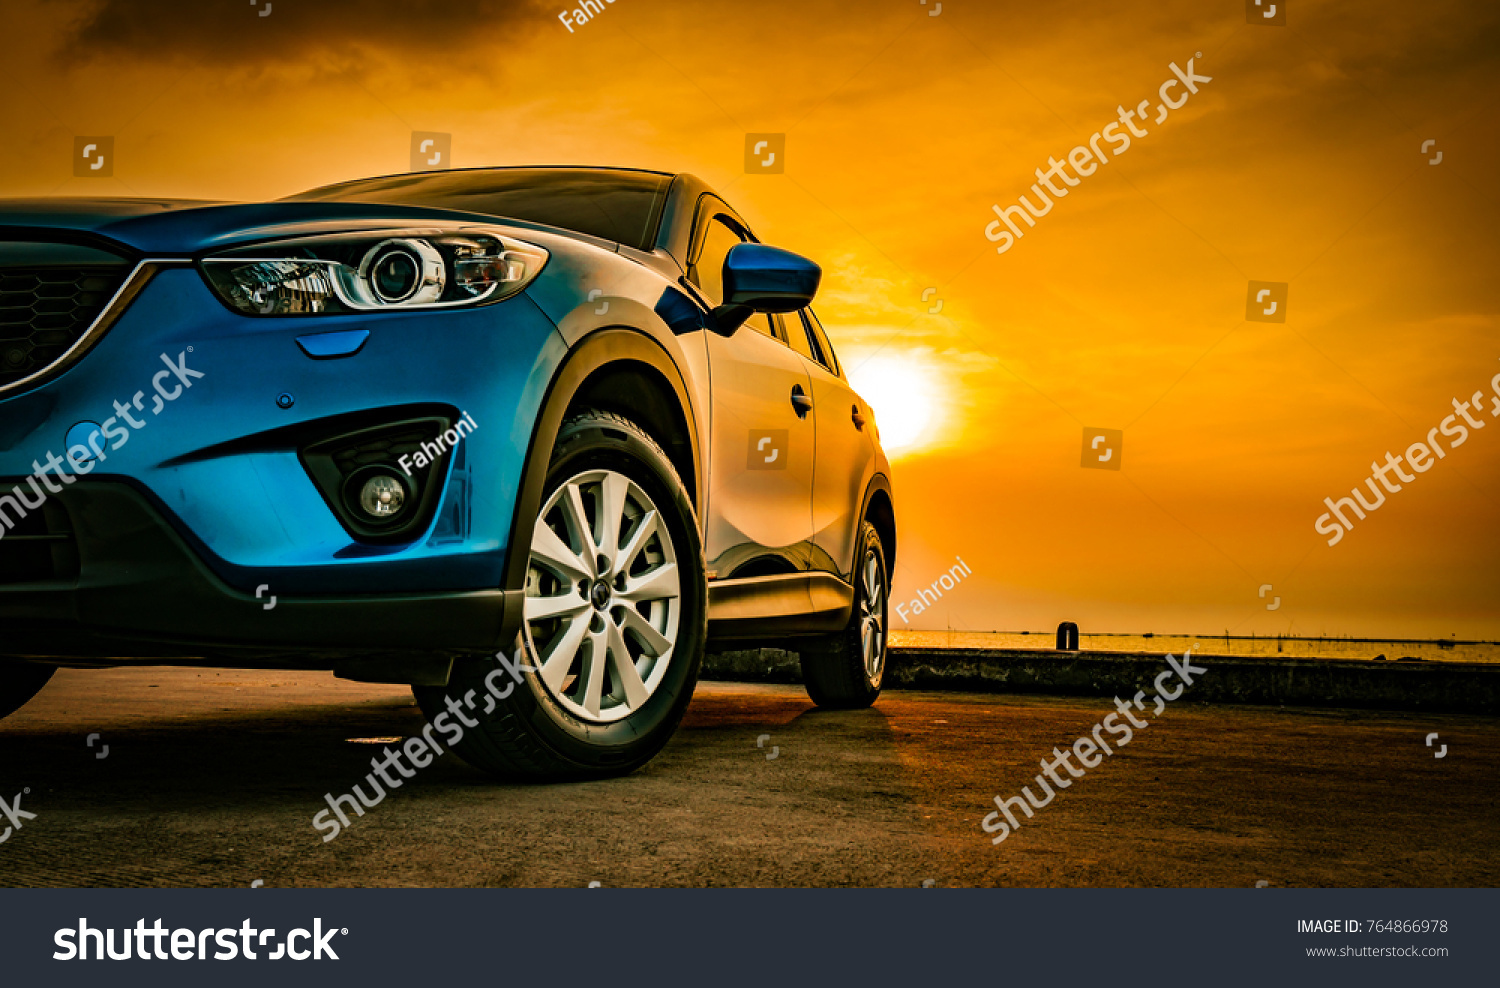 Blue compact SUV car with sport and modern design parked on concrete road by the sea at sunset. Environmentally friendly technology. Business success concept. #764866978